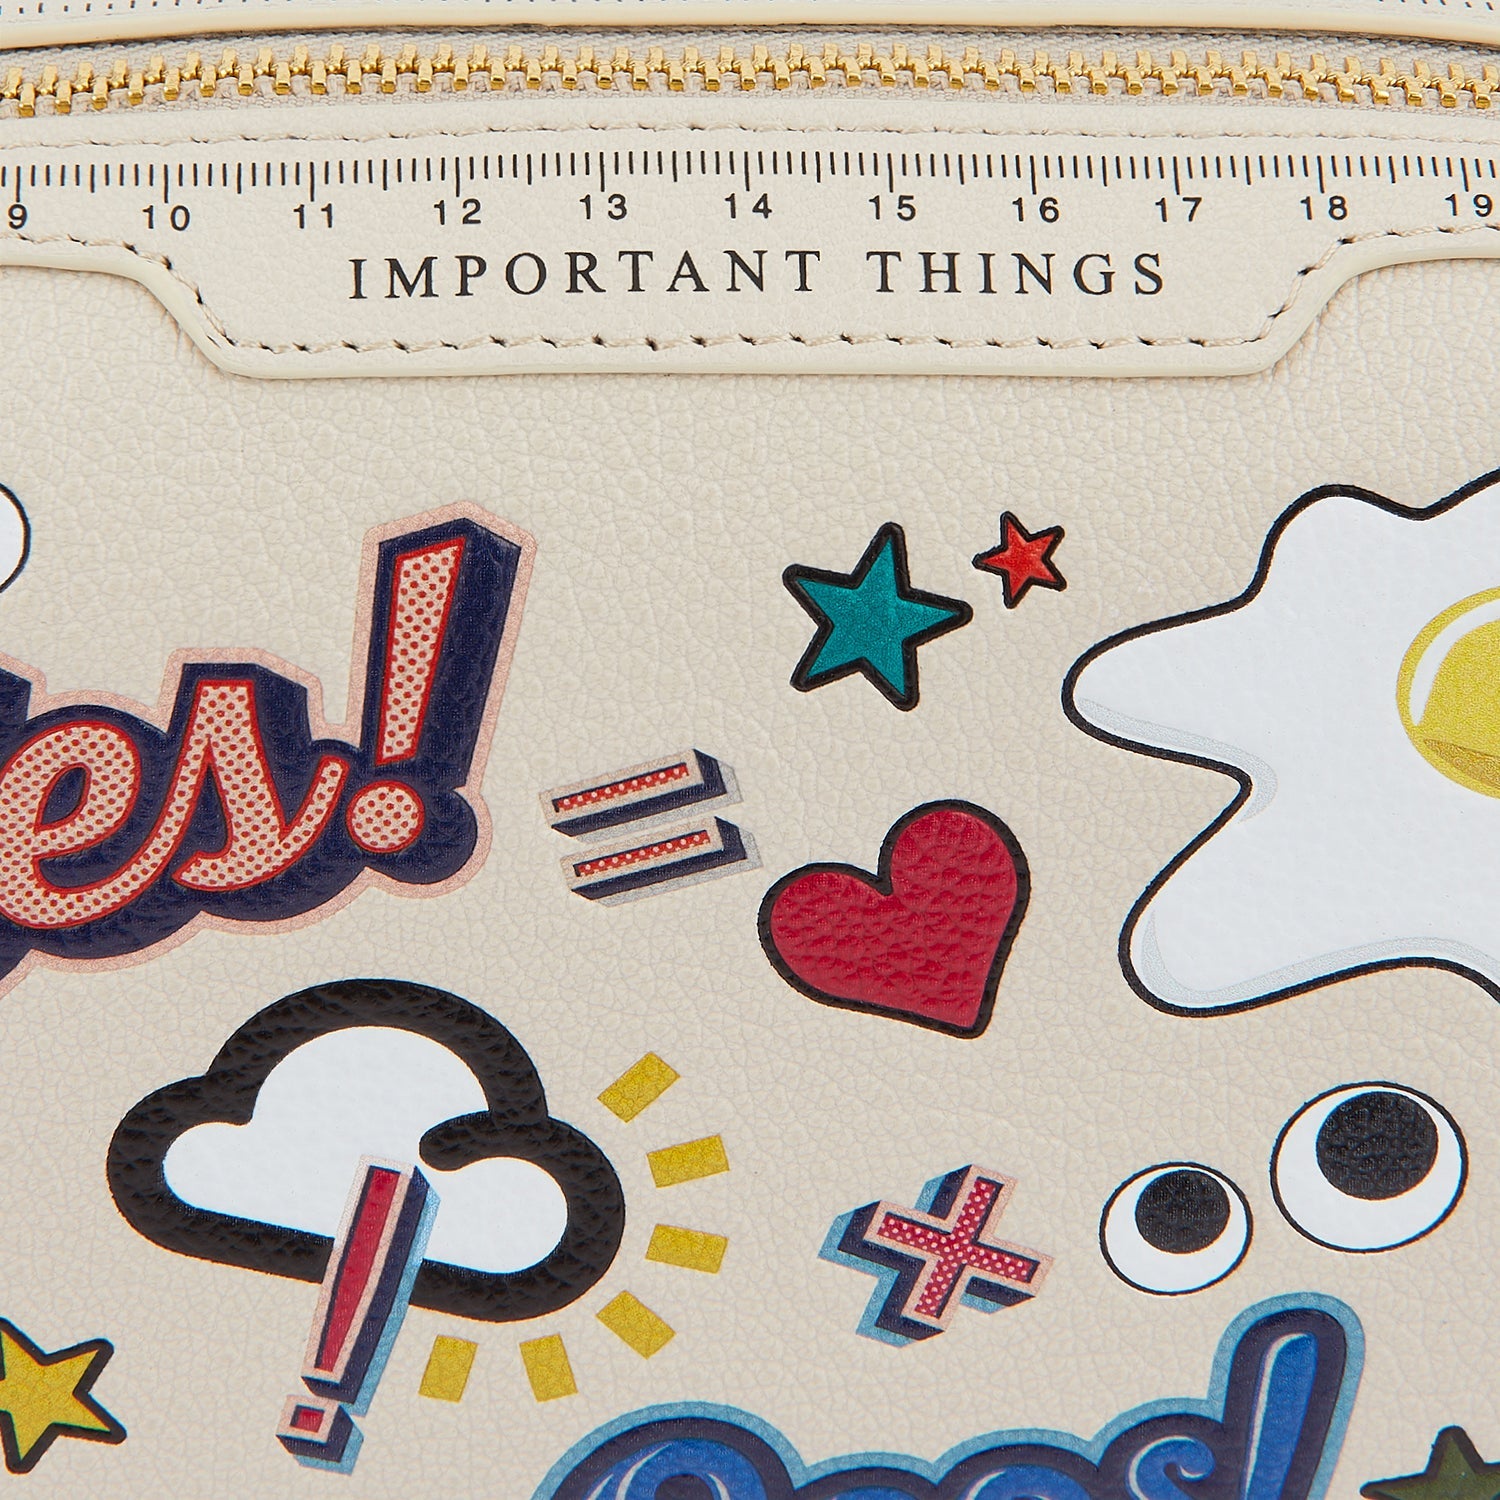 All Over Stickers Important Things -

                  
                    Shiny Capra Leather in Chalk -
                  

                  Anya Hindmarch US
